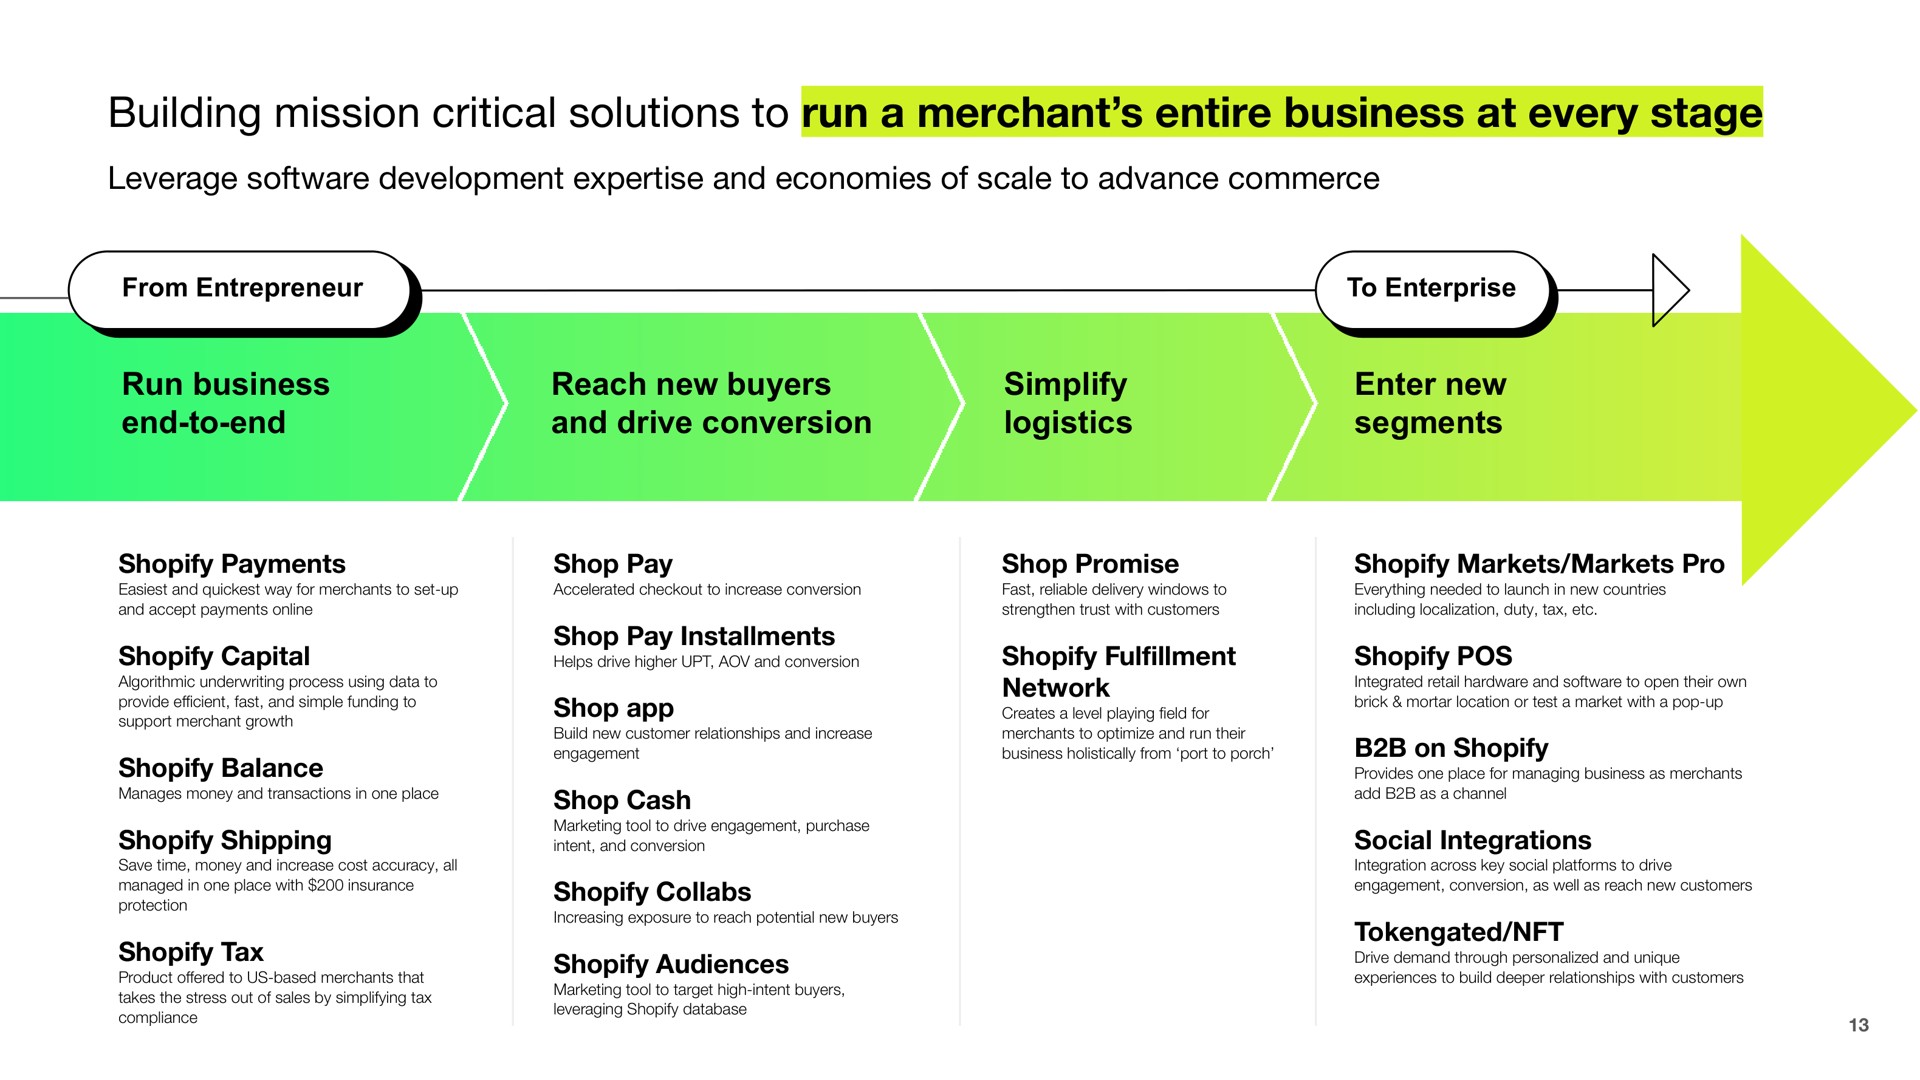 building mission critical solutions to run a merchant entire business at every stage | Shopify